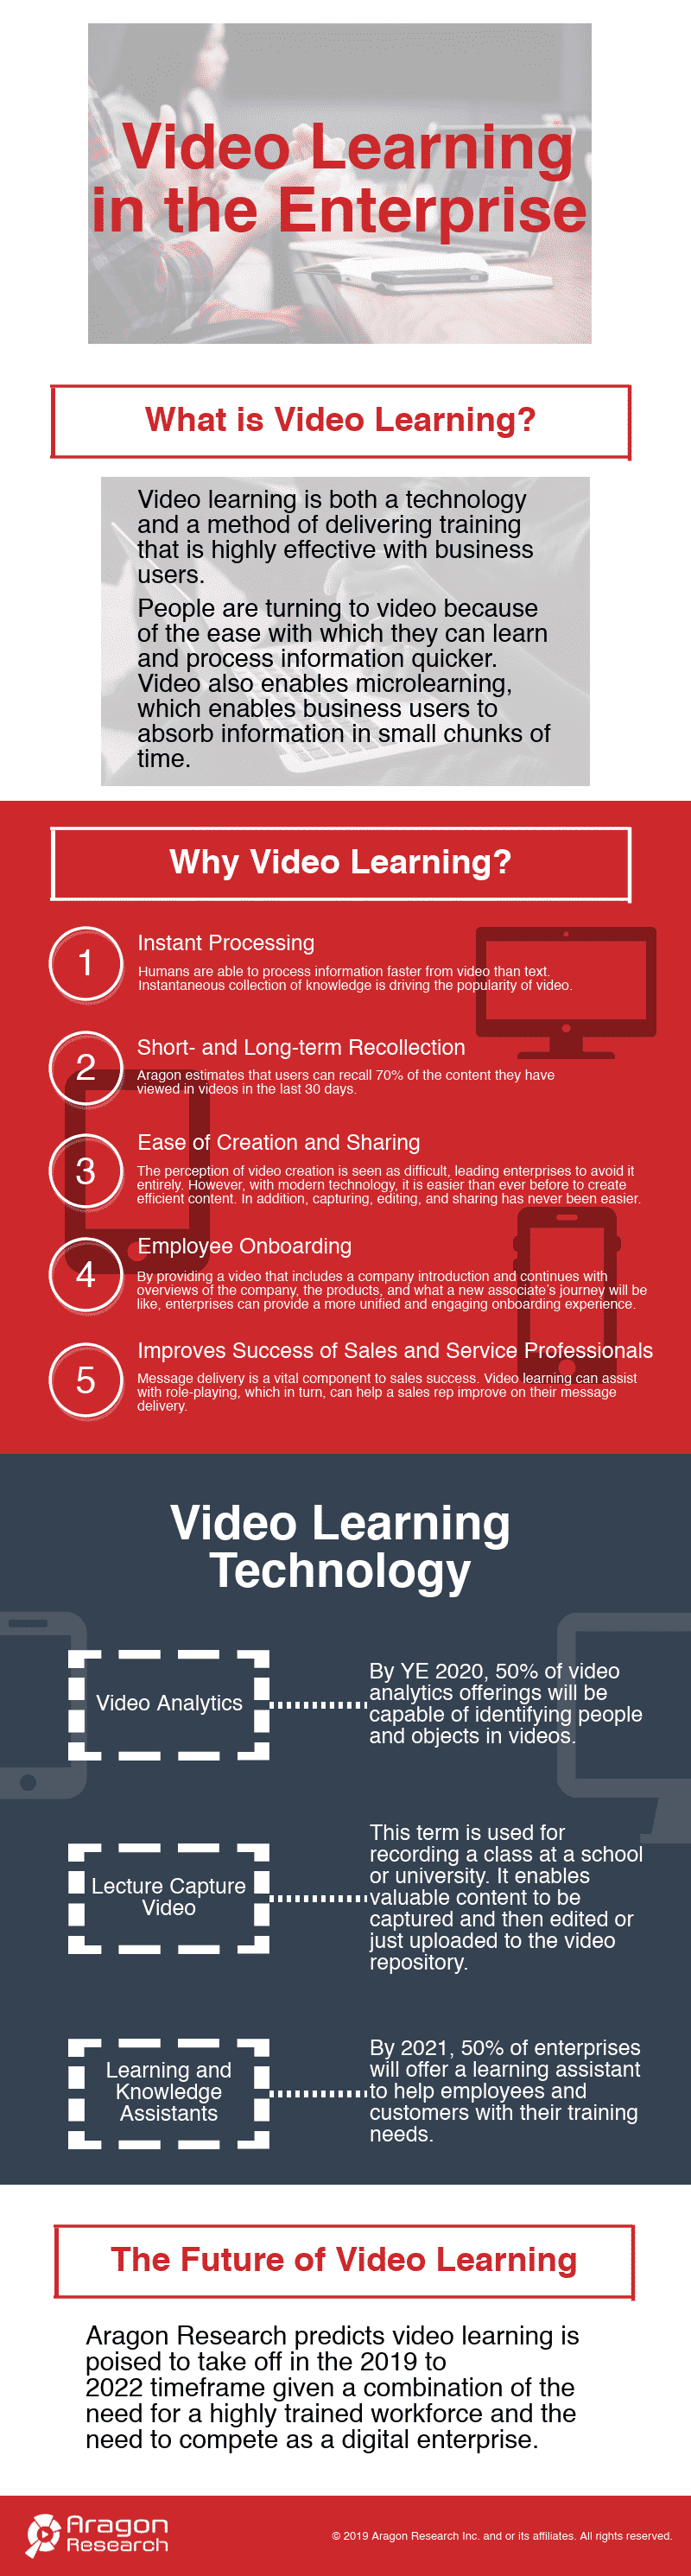 Video Learning in the Enterprise - Infographic: Video Learning in the Enterprise